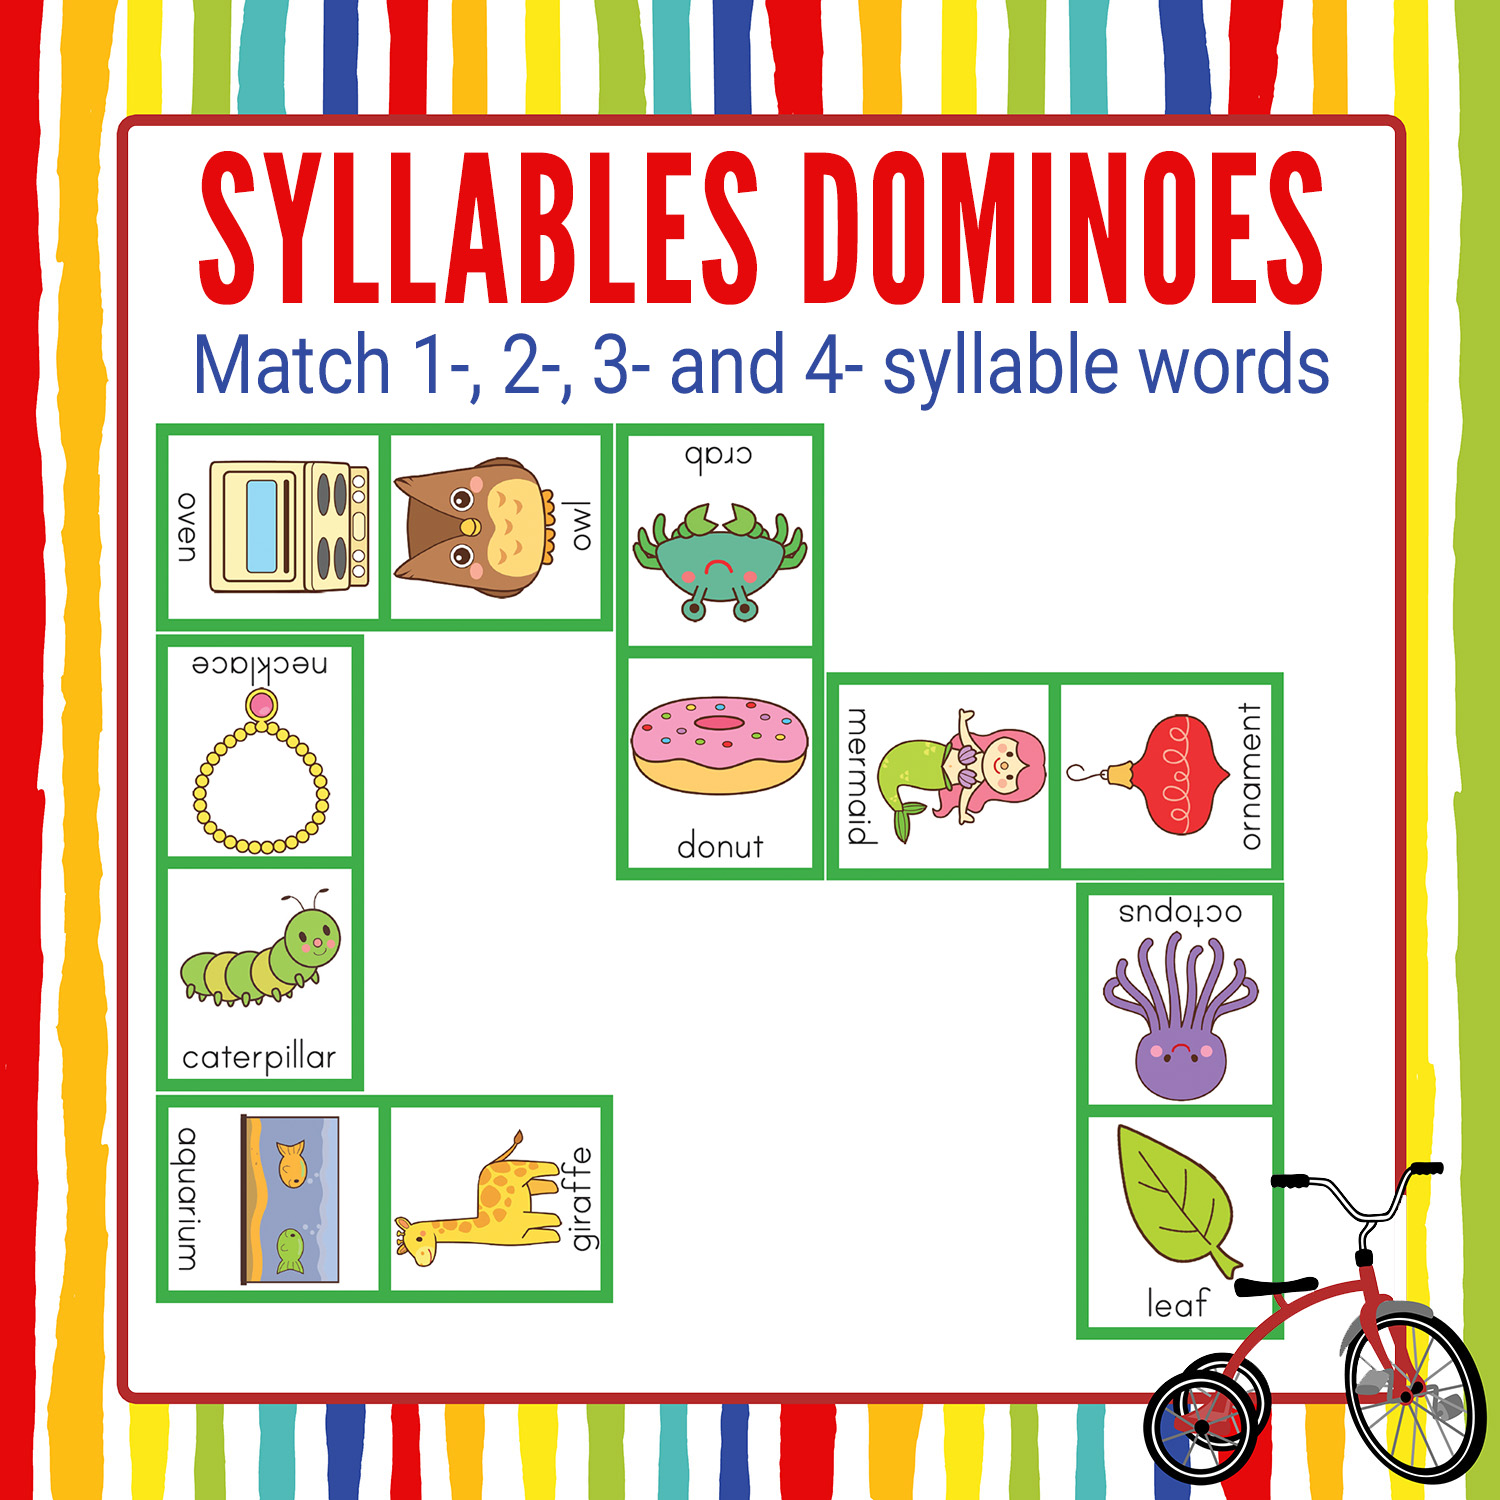 Syllables Dominoes